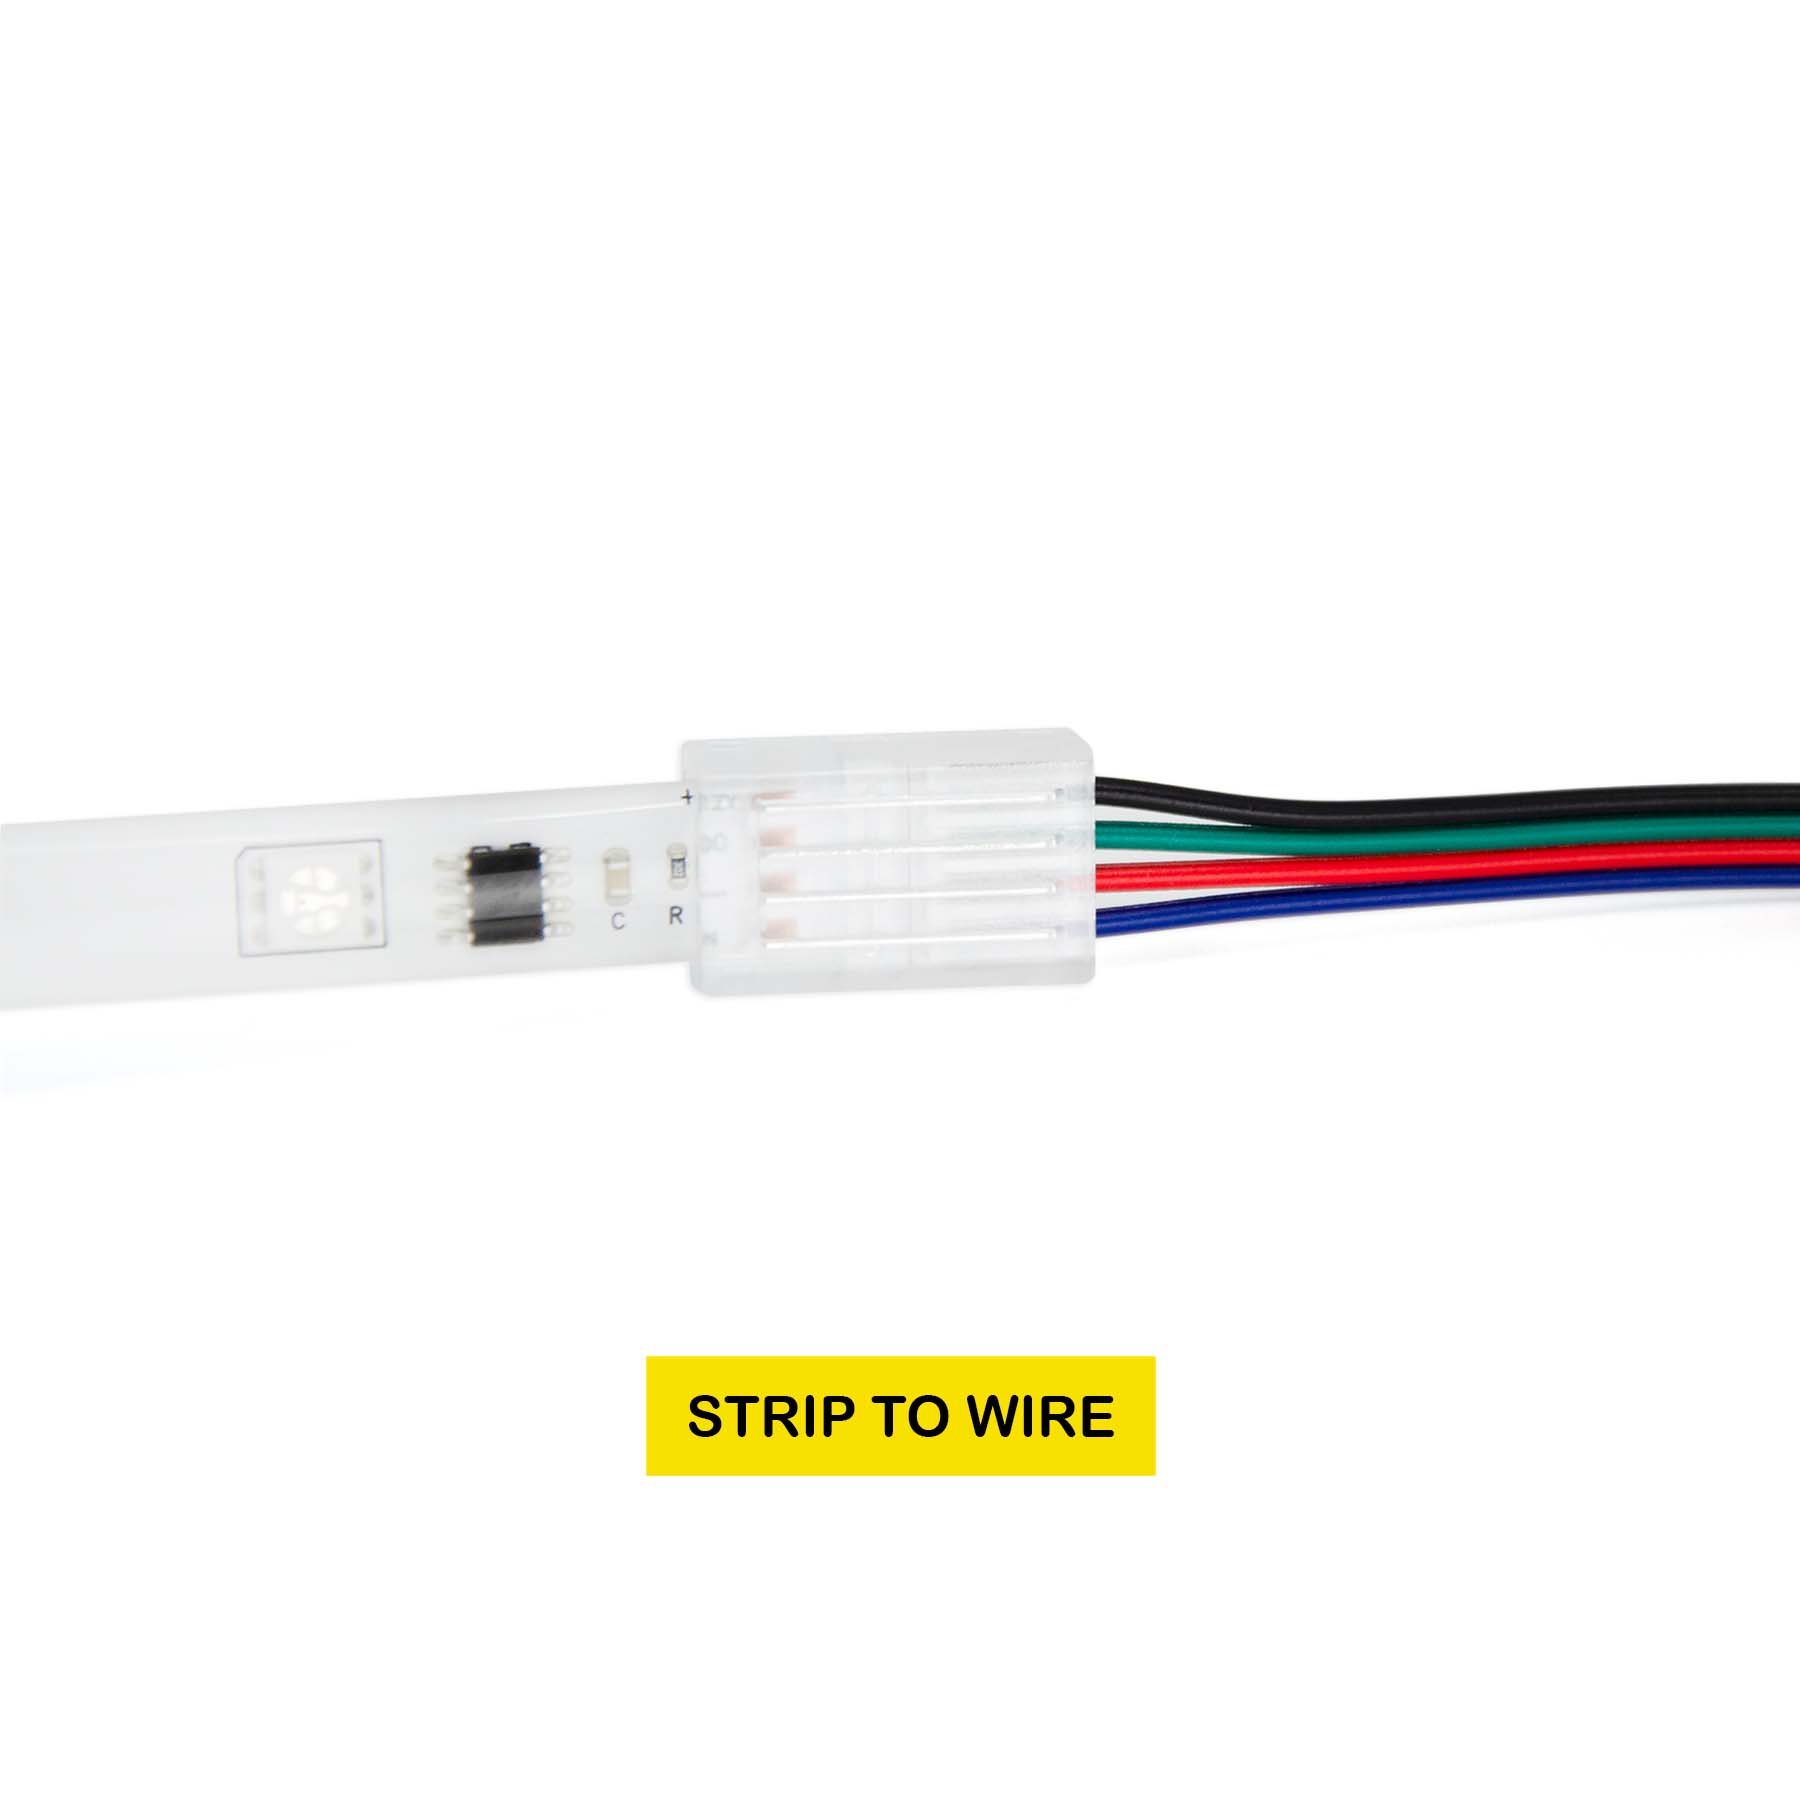 G.W.S LED Wholesale Strip Connectors 12mm / 5 4 Pin Straight Connector For RGB LED Strip Lights